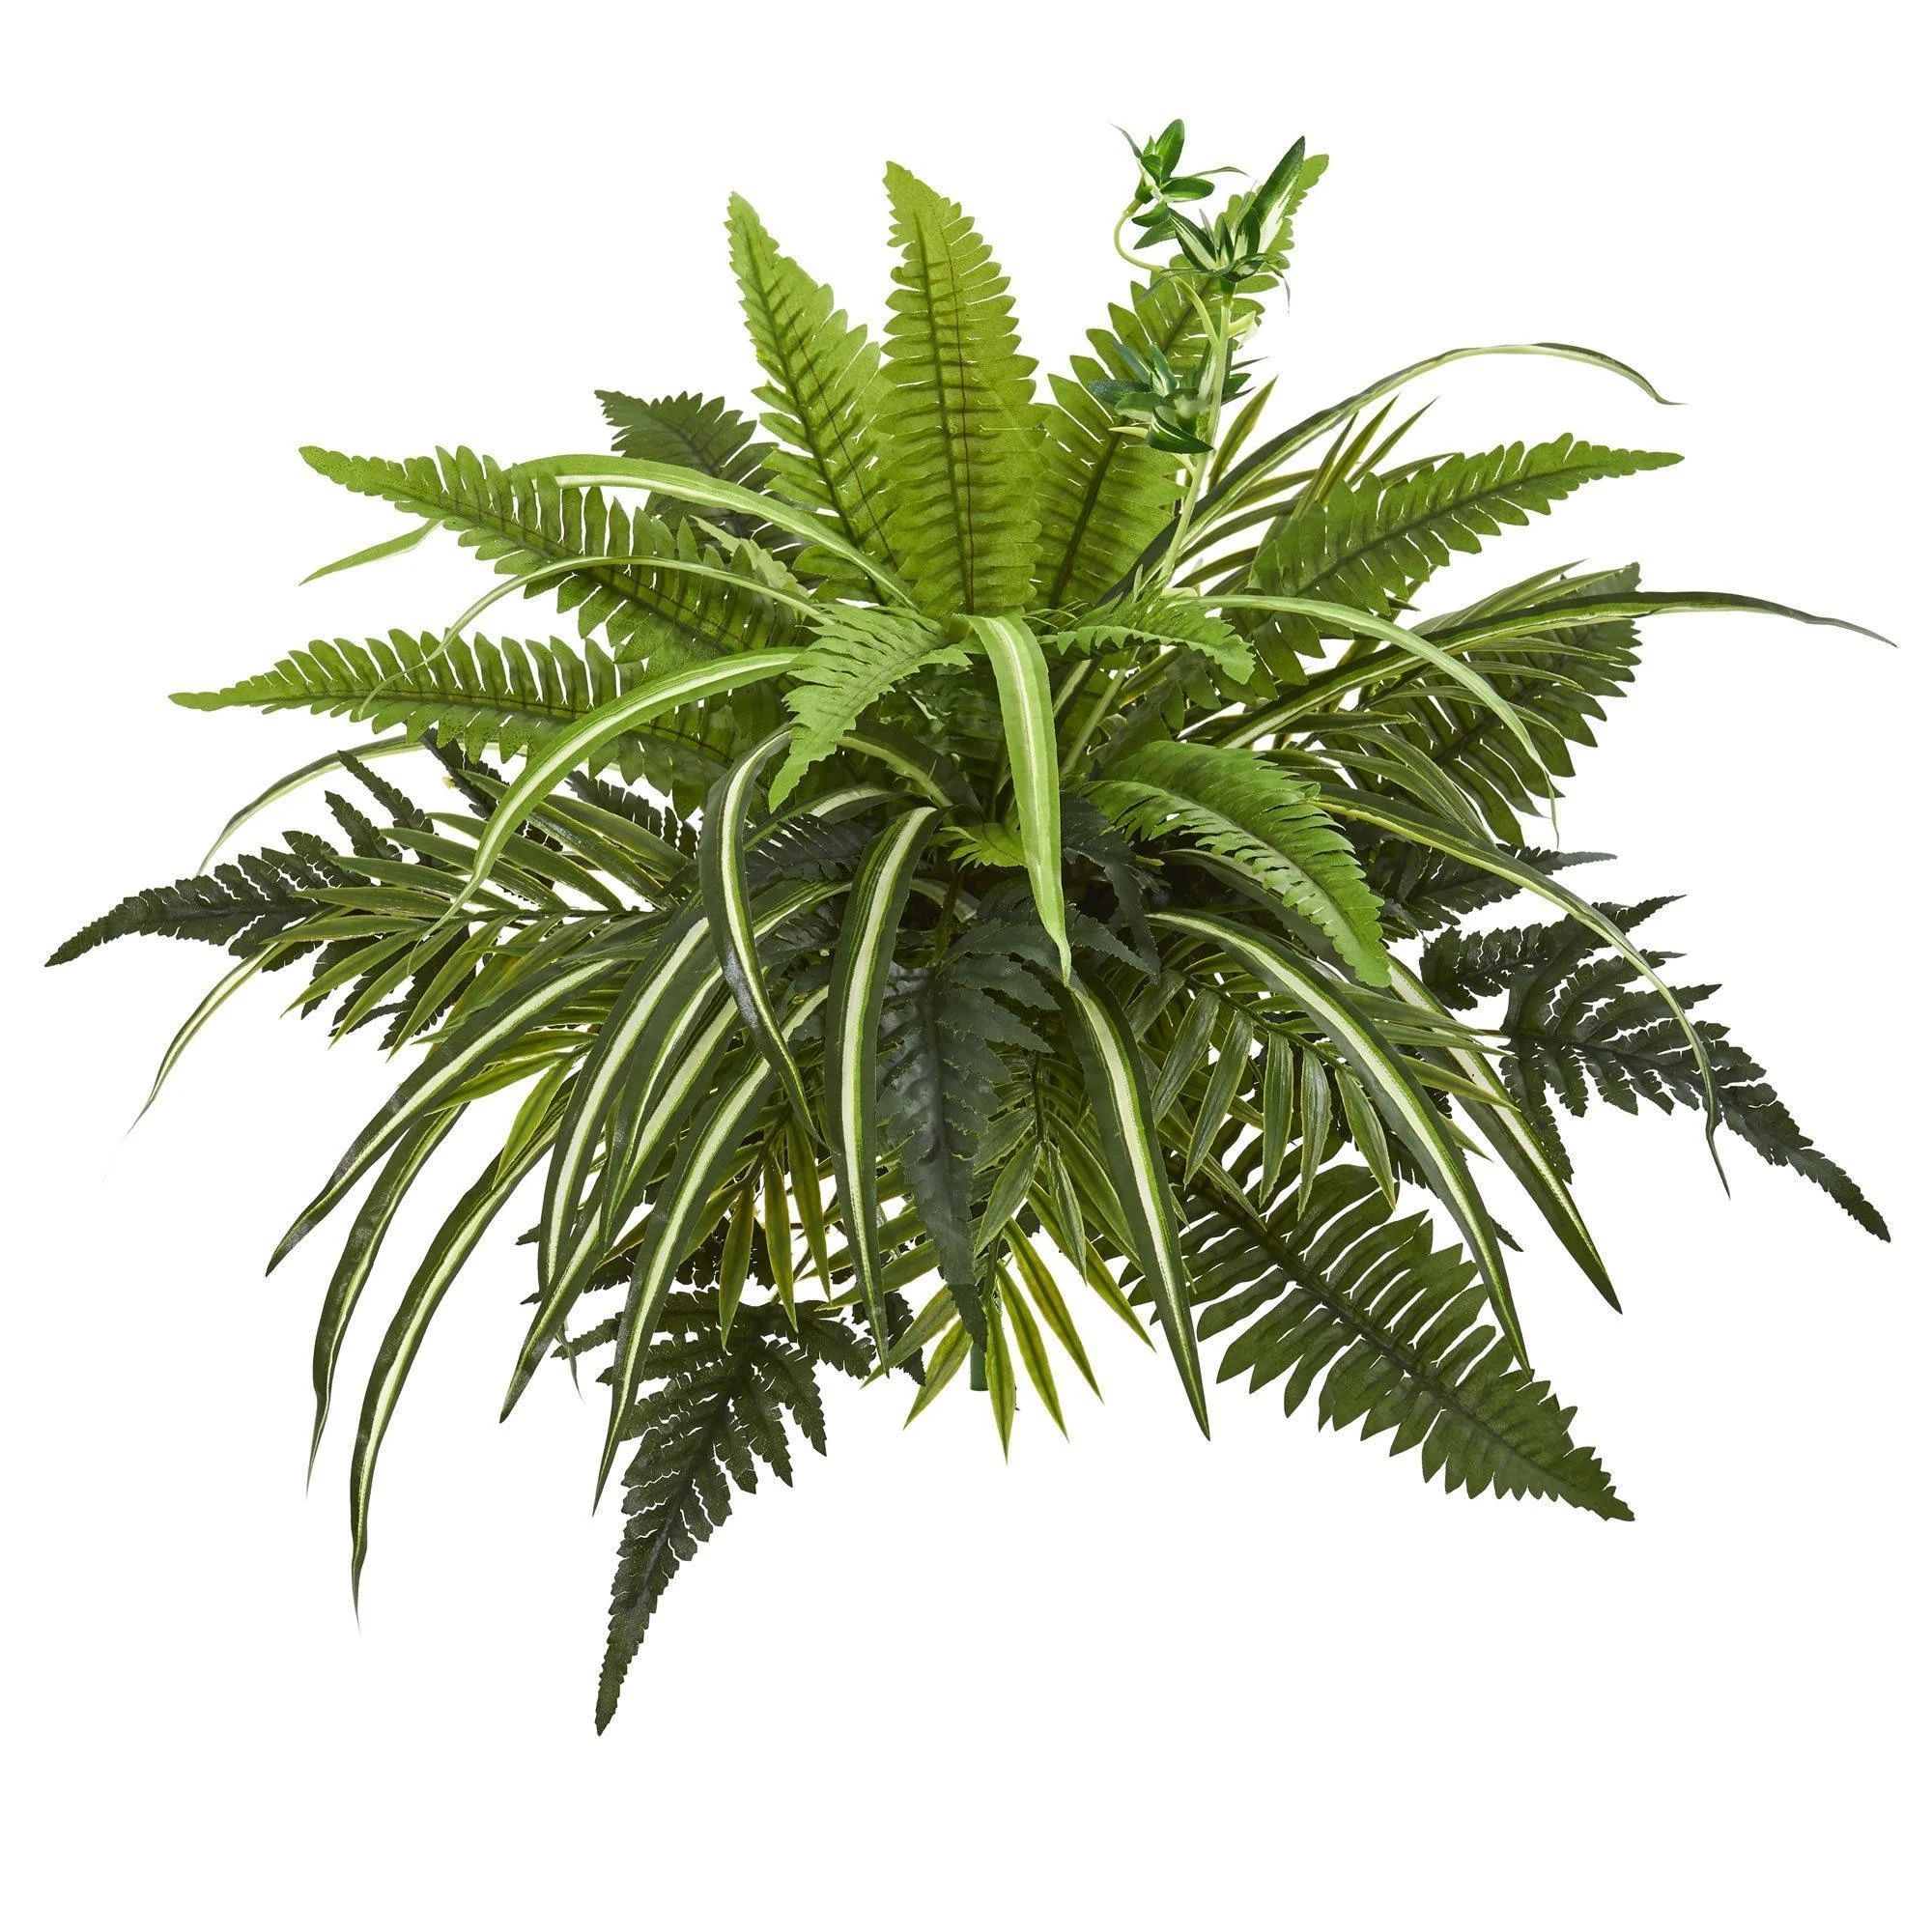 22” Mixed Greens and Fern Artificial Bush Plant (Set of 3) | Nearly Natural